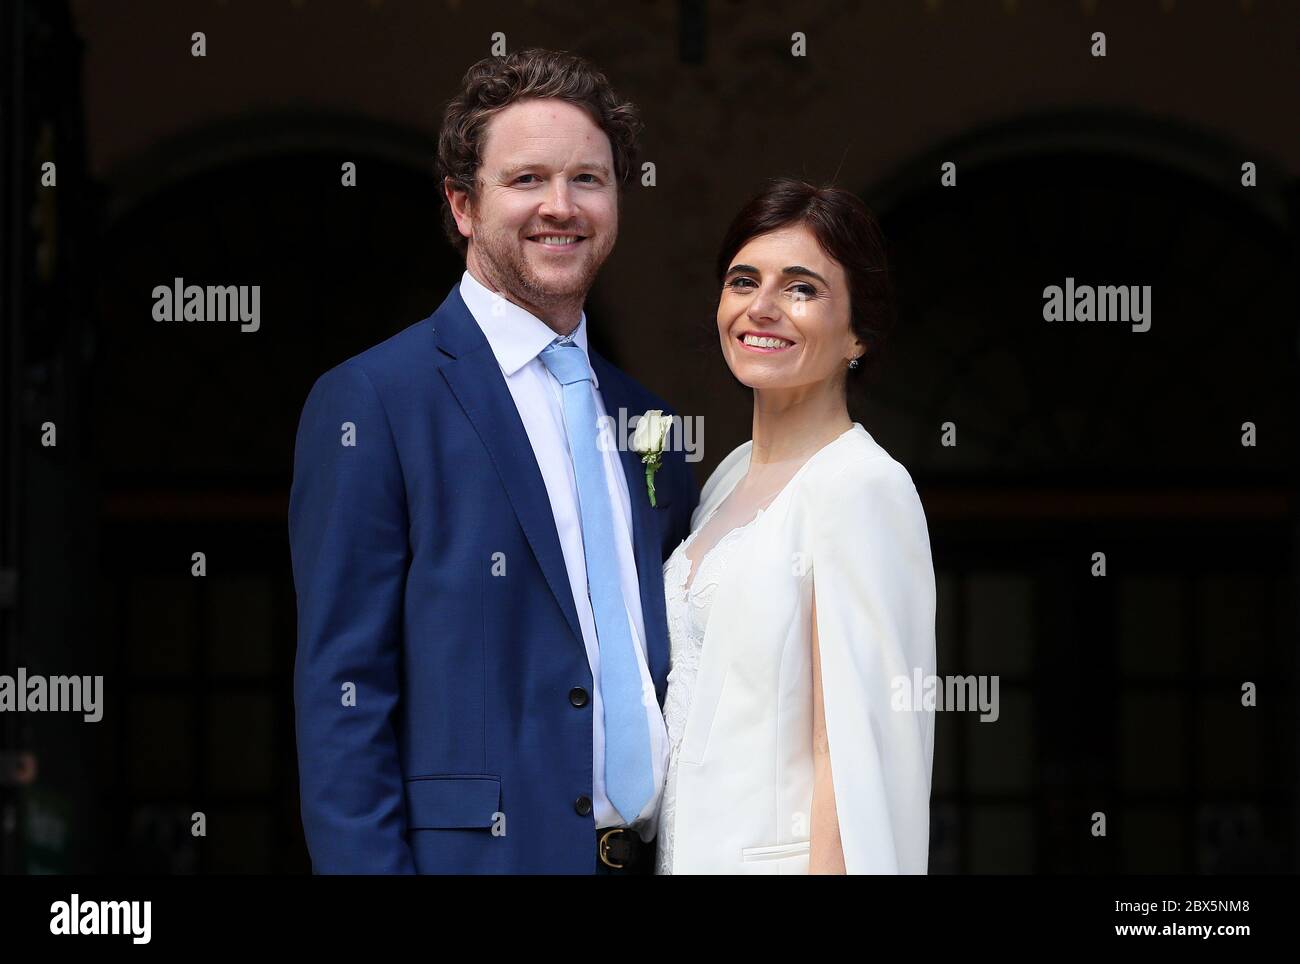 Michael McCaw, from Belfast, and Lucrecia Landeta Garcia, originally from Argentina, following their wedding ceremony at City Hall in Belfast, as outside weddings with up to six people are currently permitted, to change from Monday to ceremonies permitted outdoors, with no more than 10 people present. Stock Photo